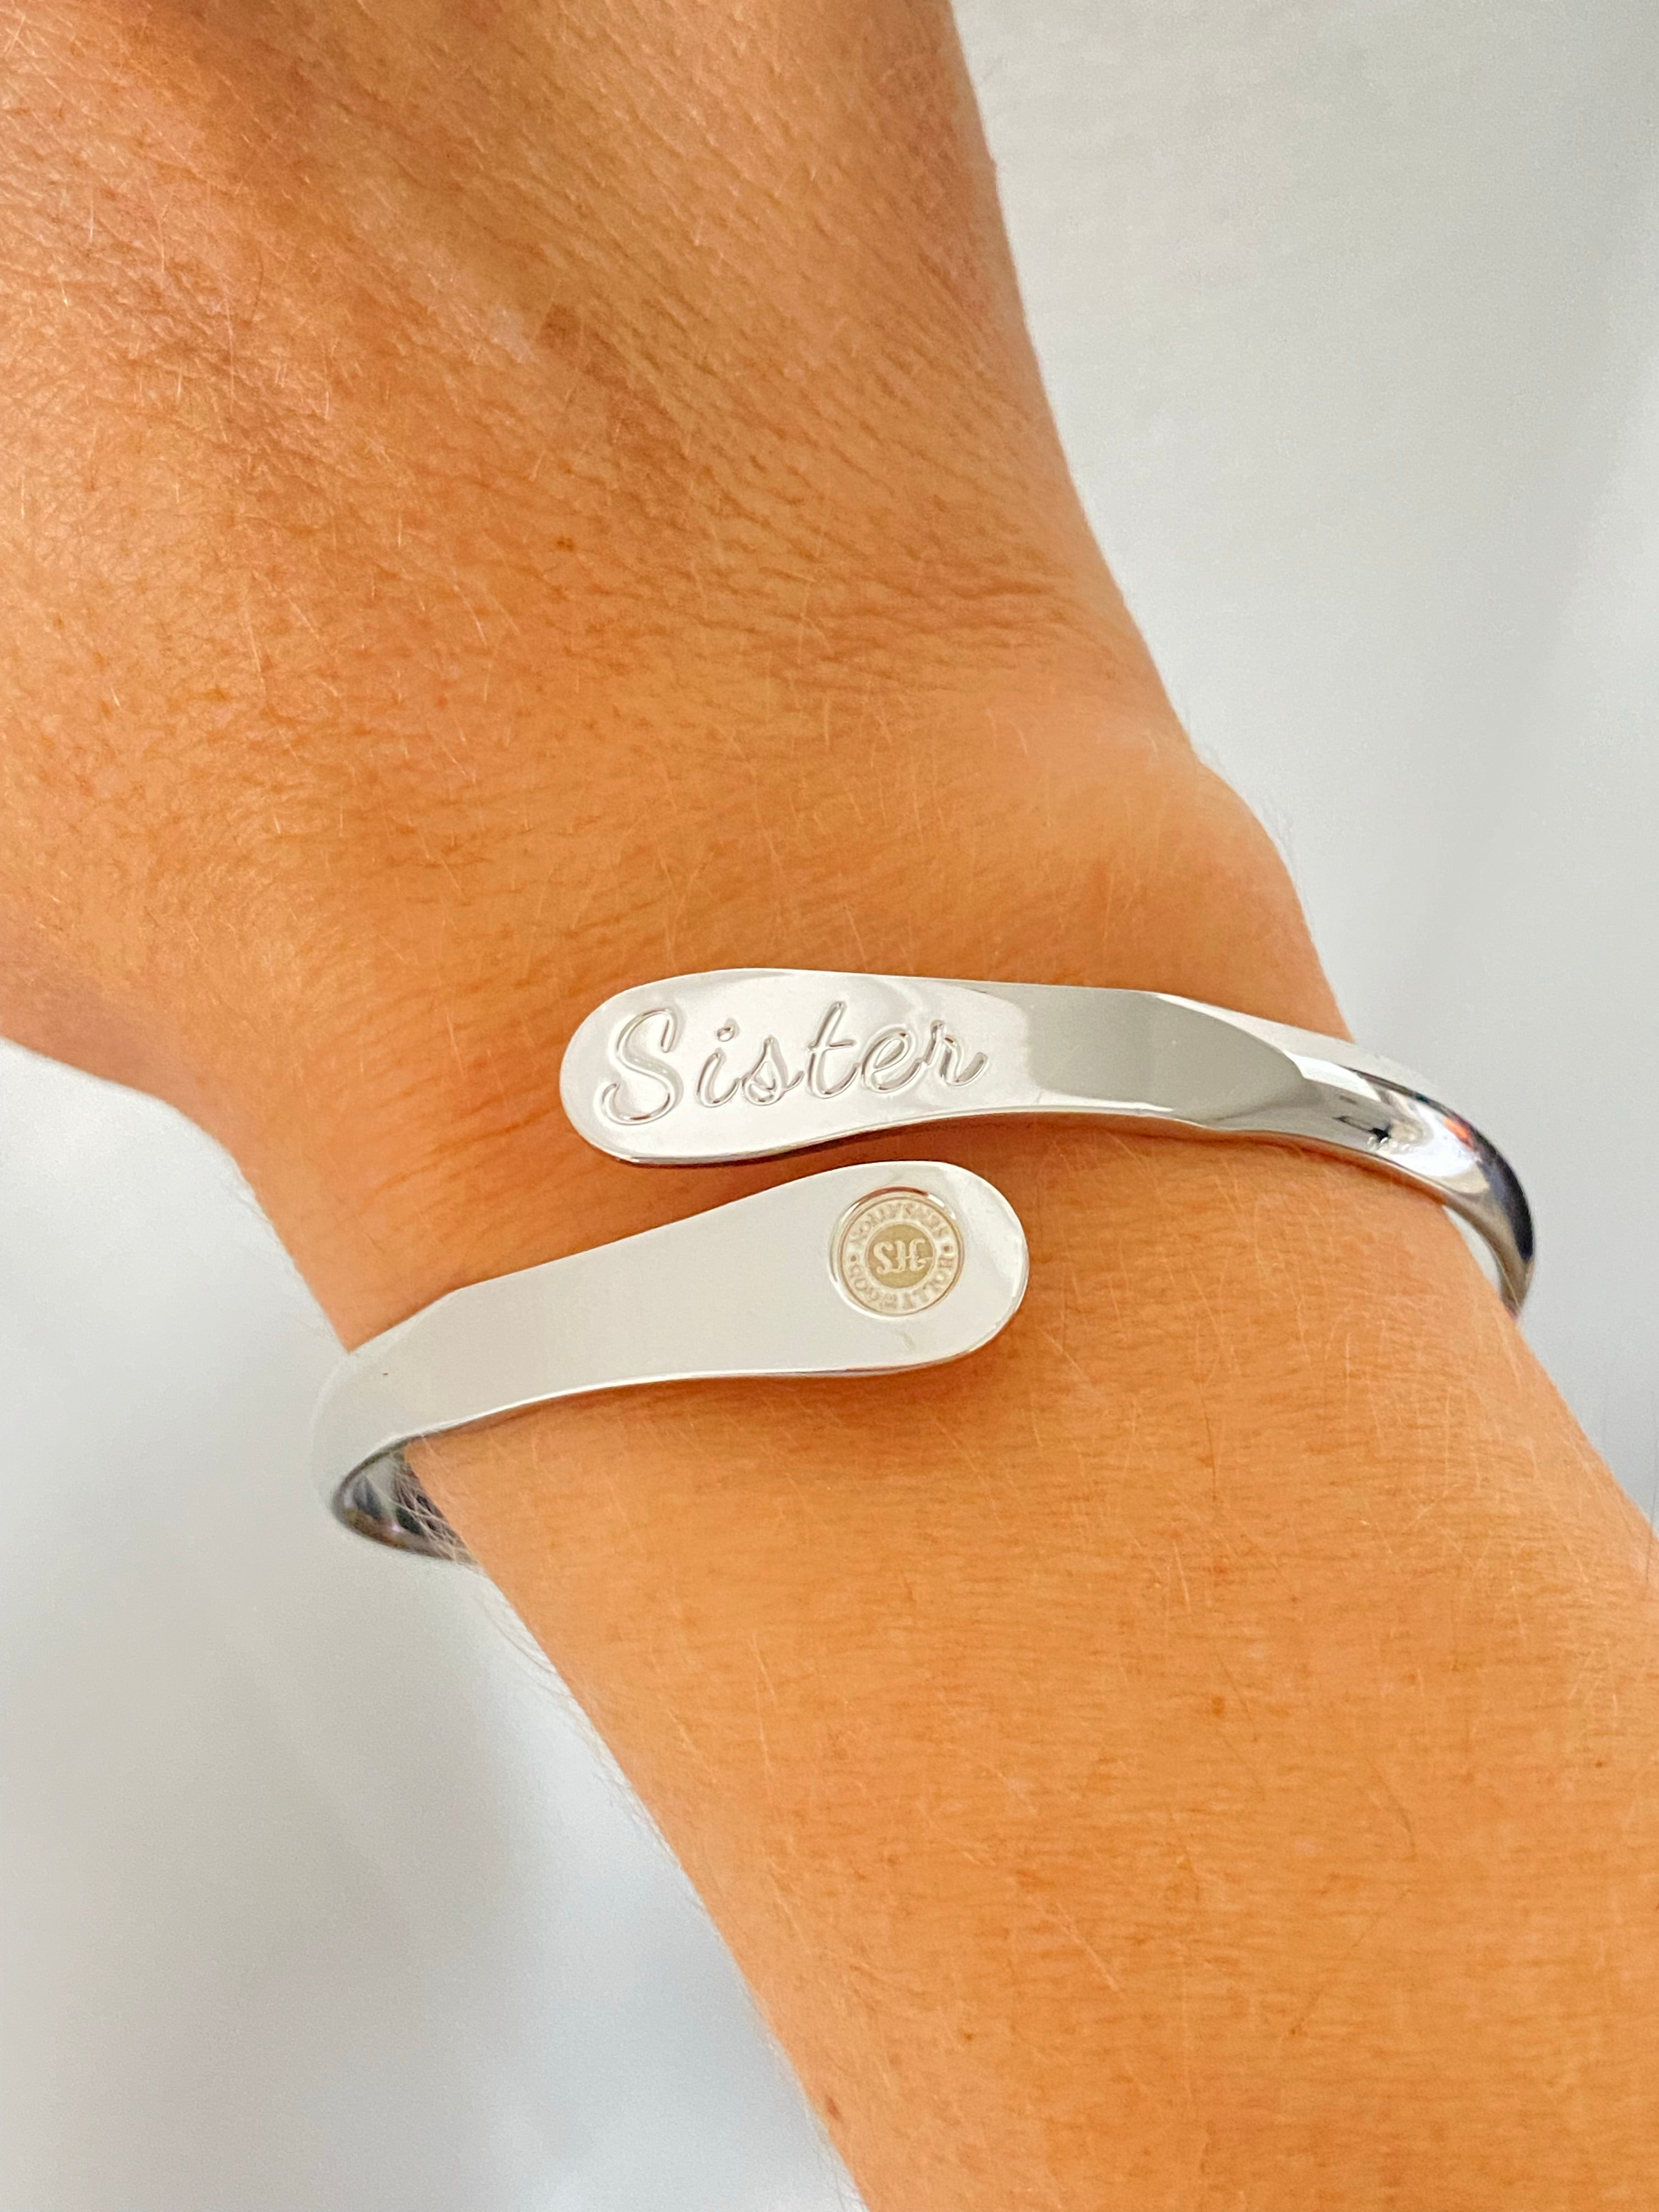 Ladies Bracelet with Engraving! Personalised Jewellery for Women. Engraved  Gifts | eBay